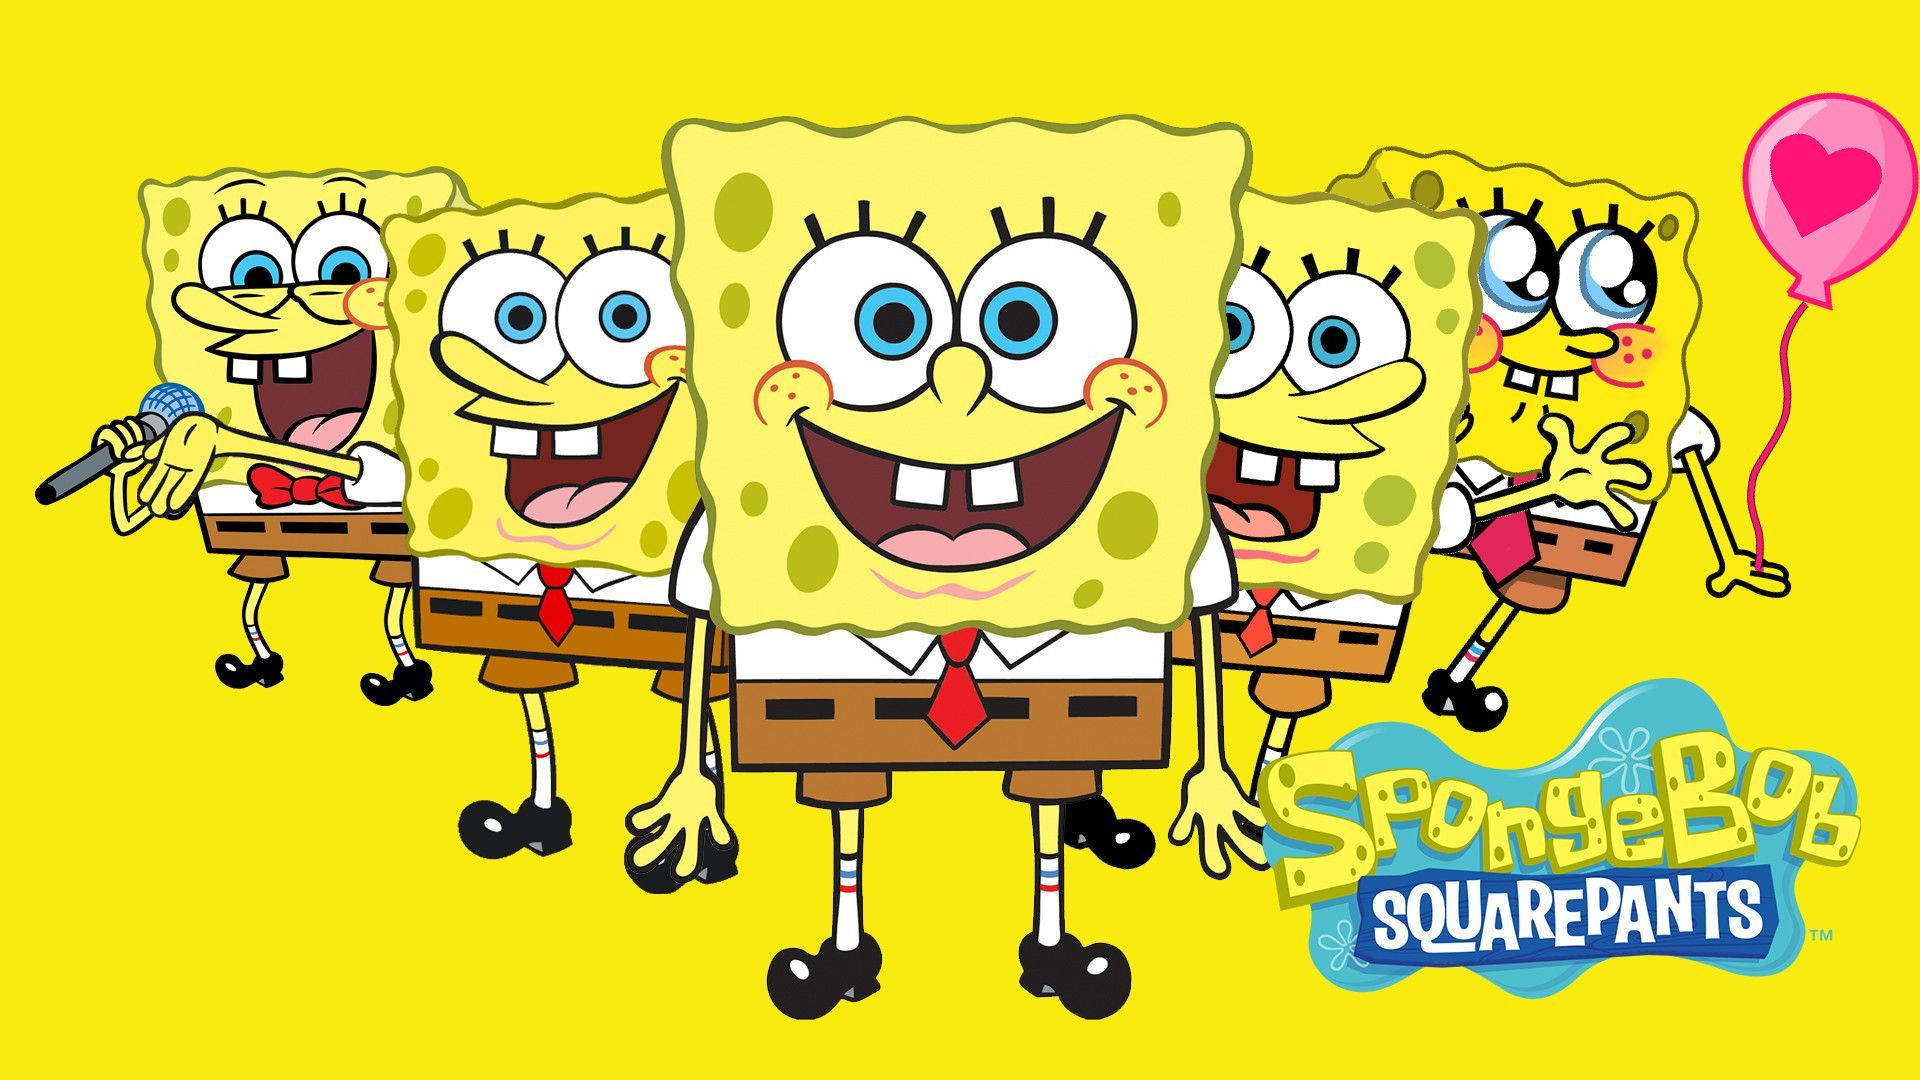 Cute Spongebob Faces In Five Expressions Poster Background